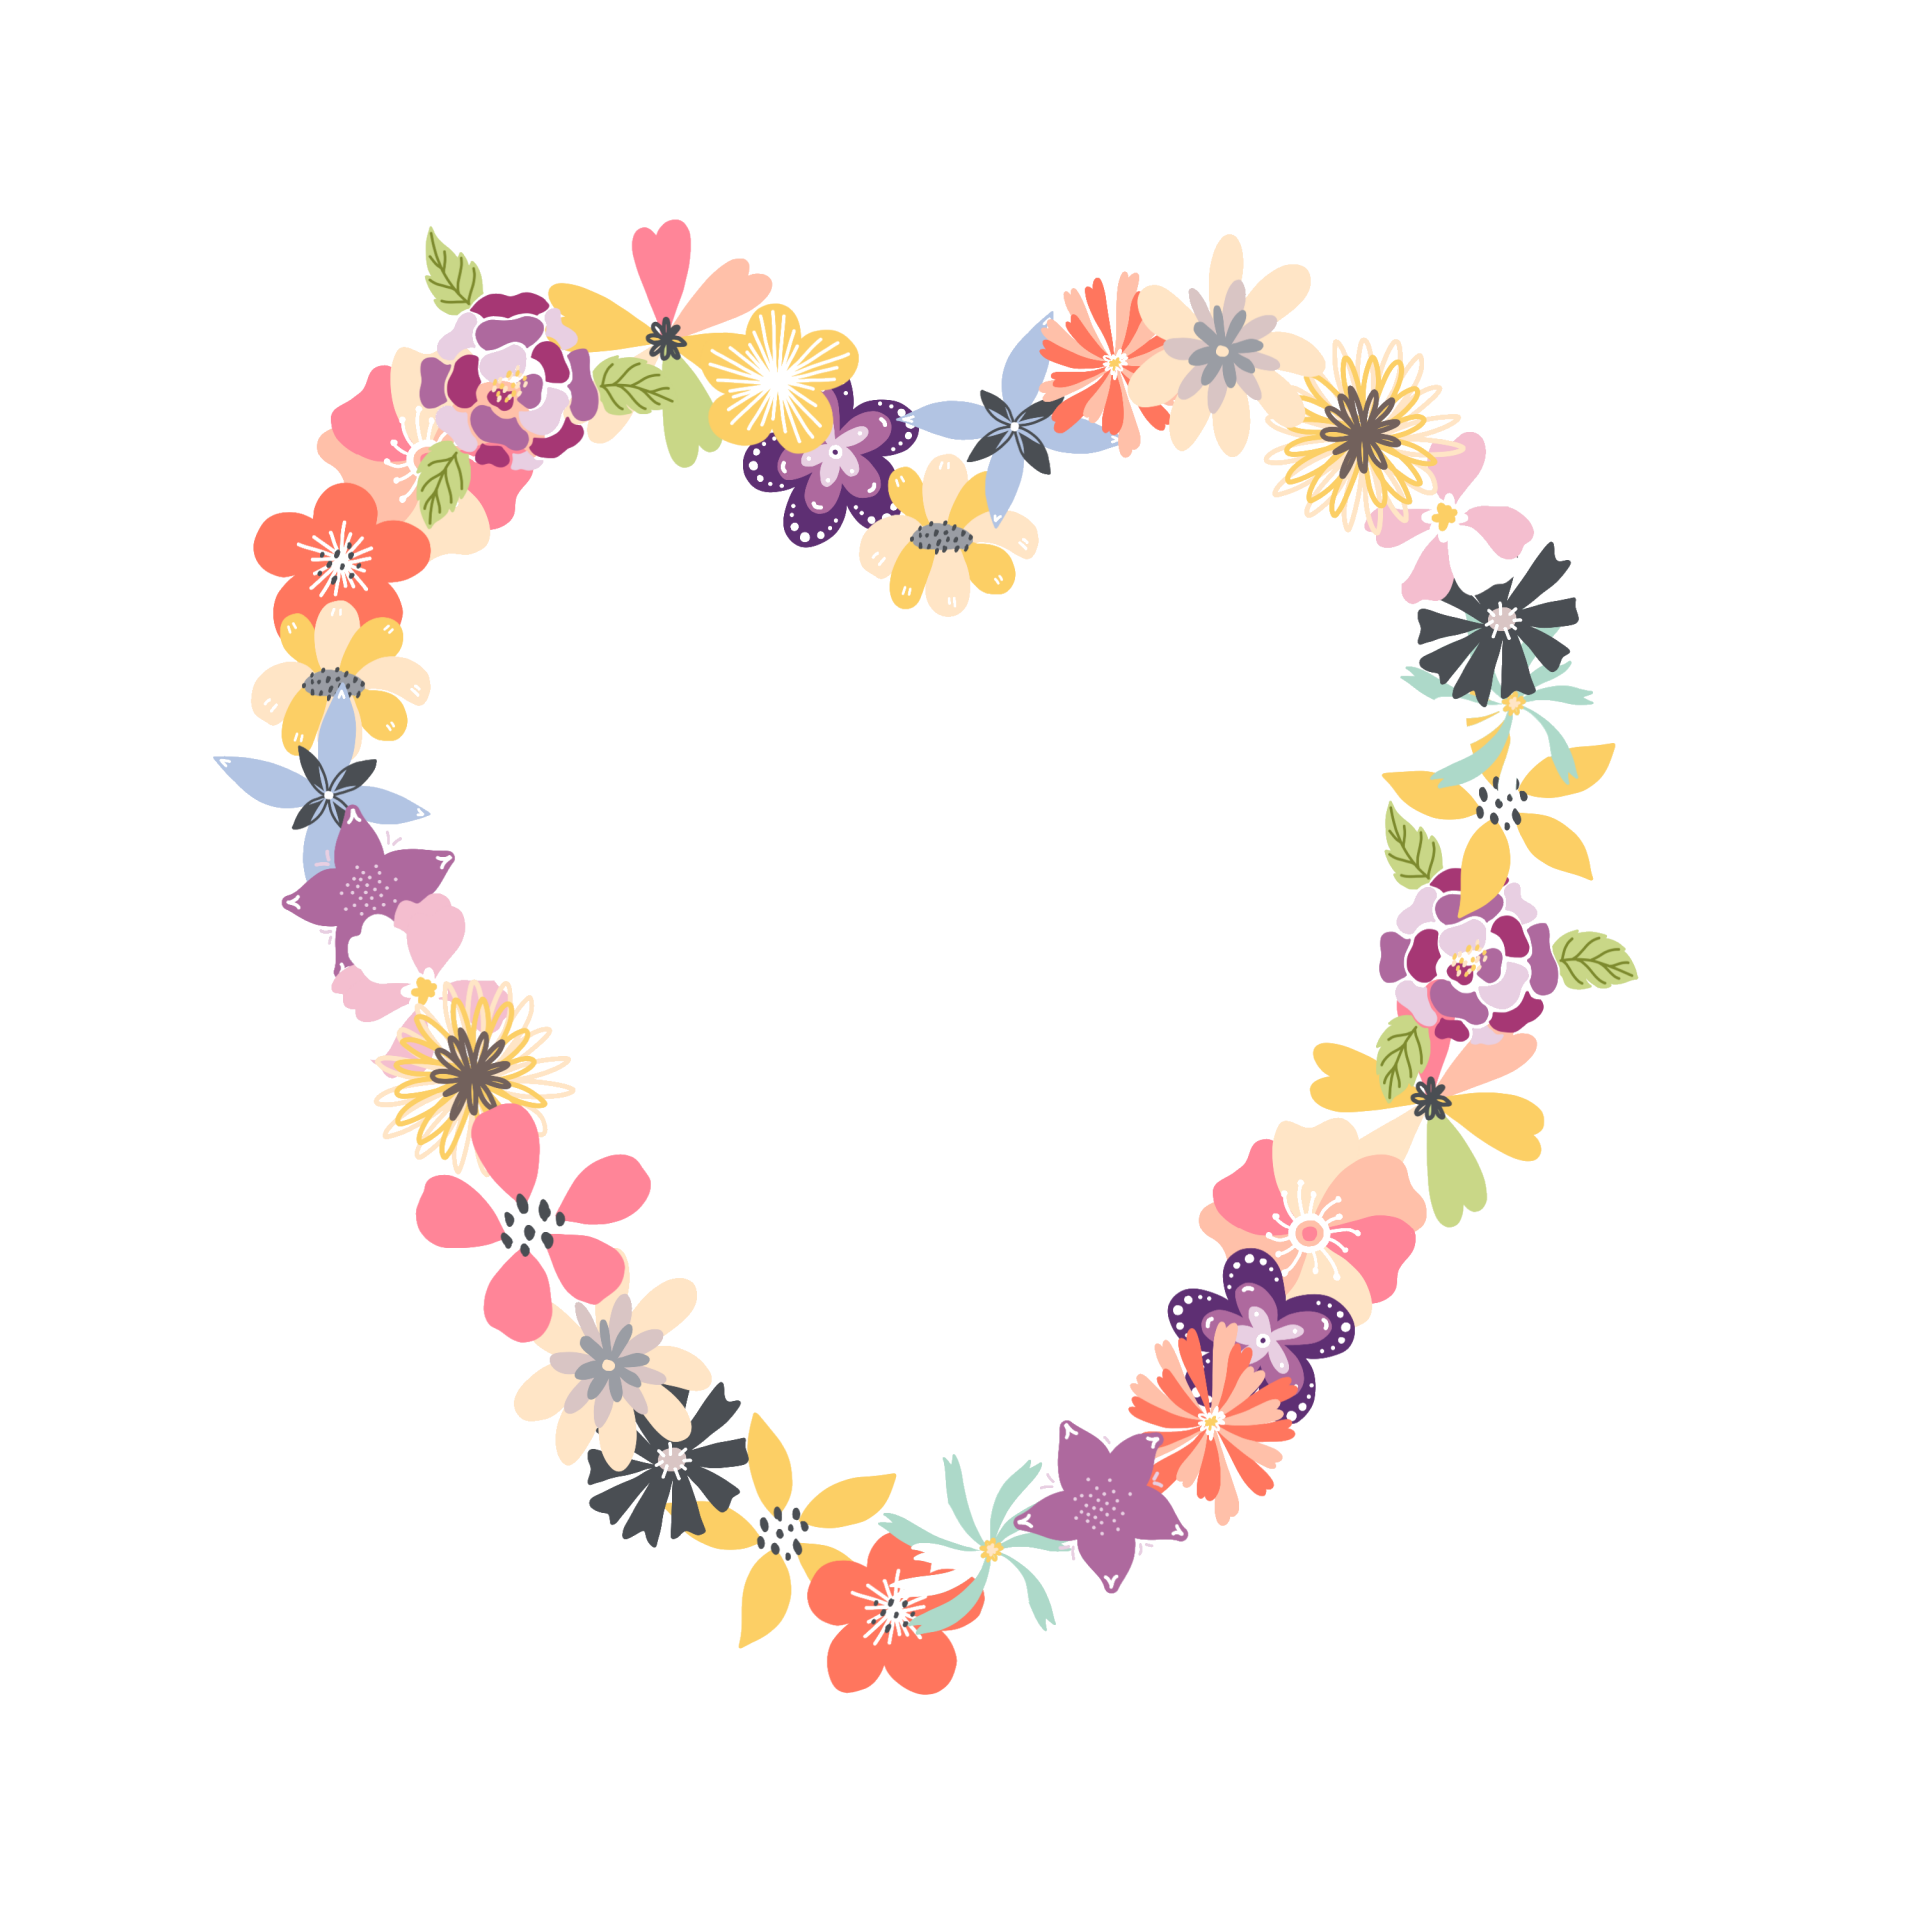 Heart Vector Romantic Flower Free Download Image PNG Image